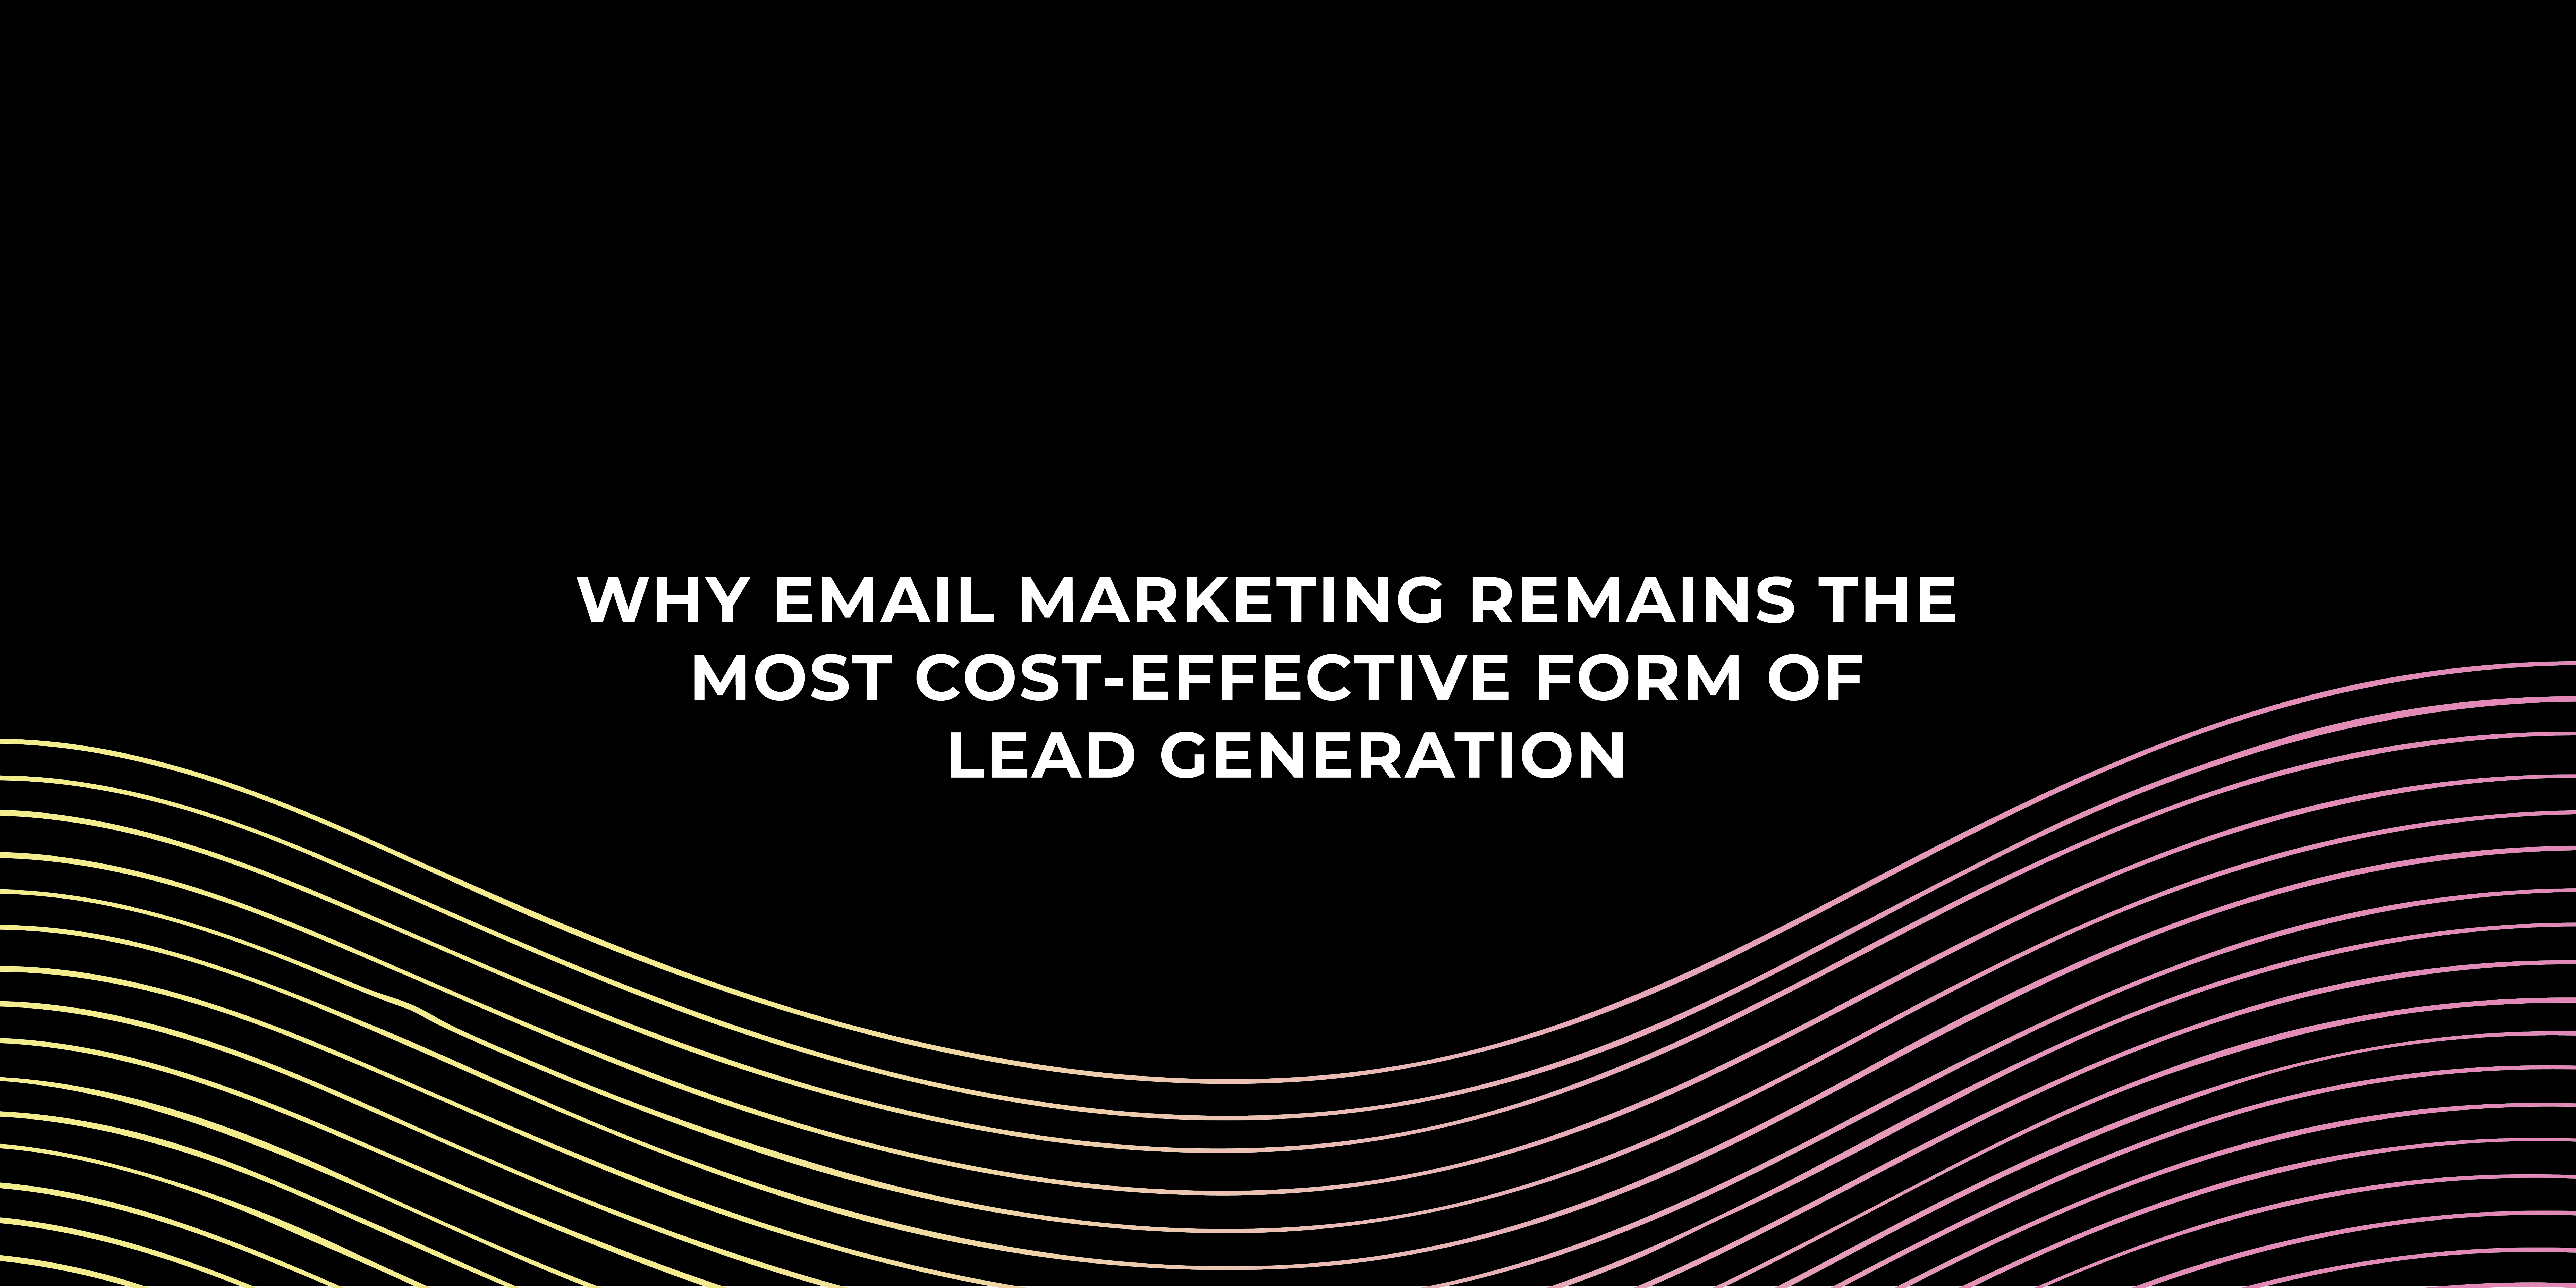 WHY EMAIL MARKETING REMAINS THE MOST COST-EFFECTIVE FORM OF LEAD GENERATION